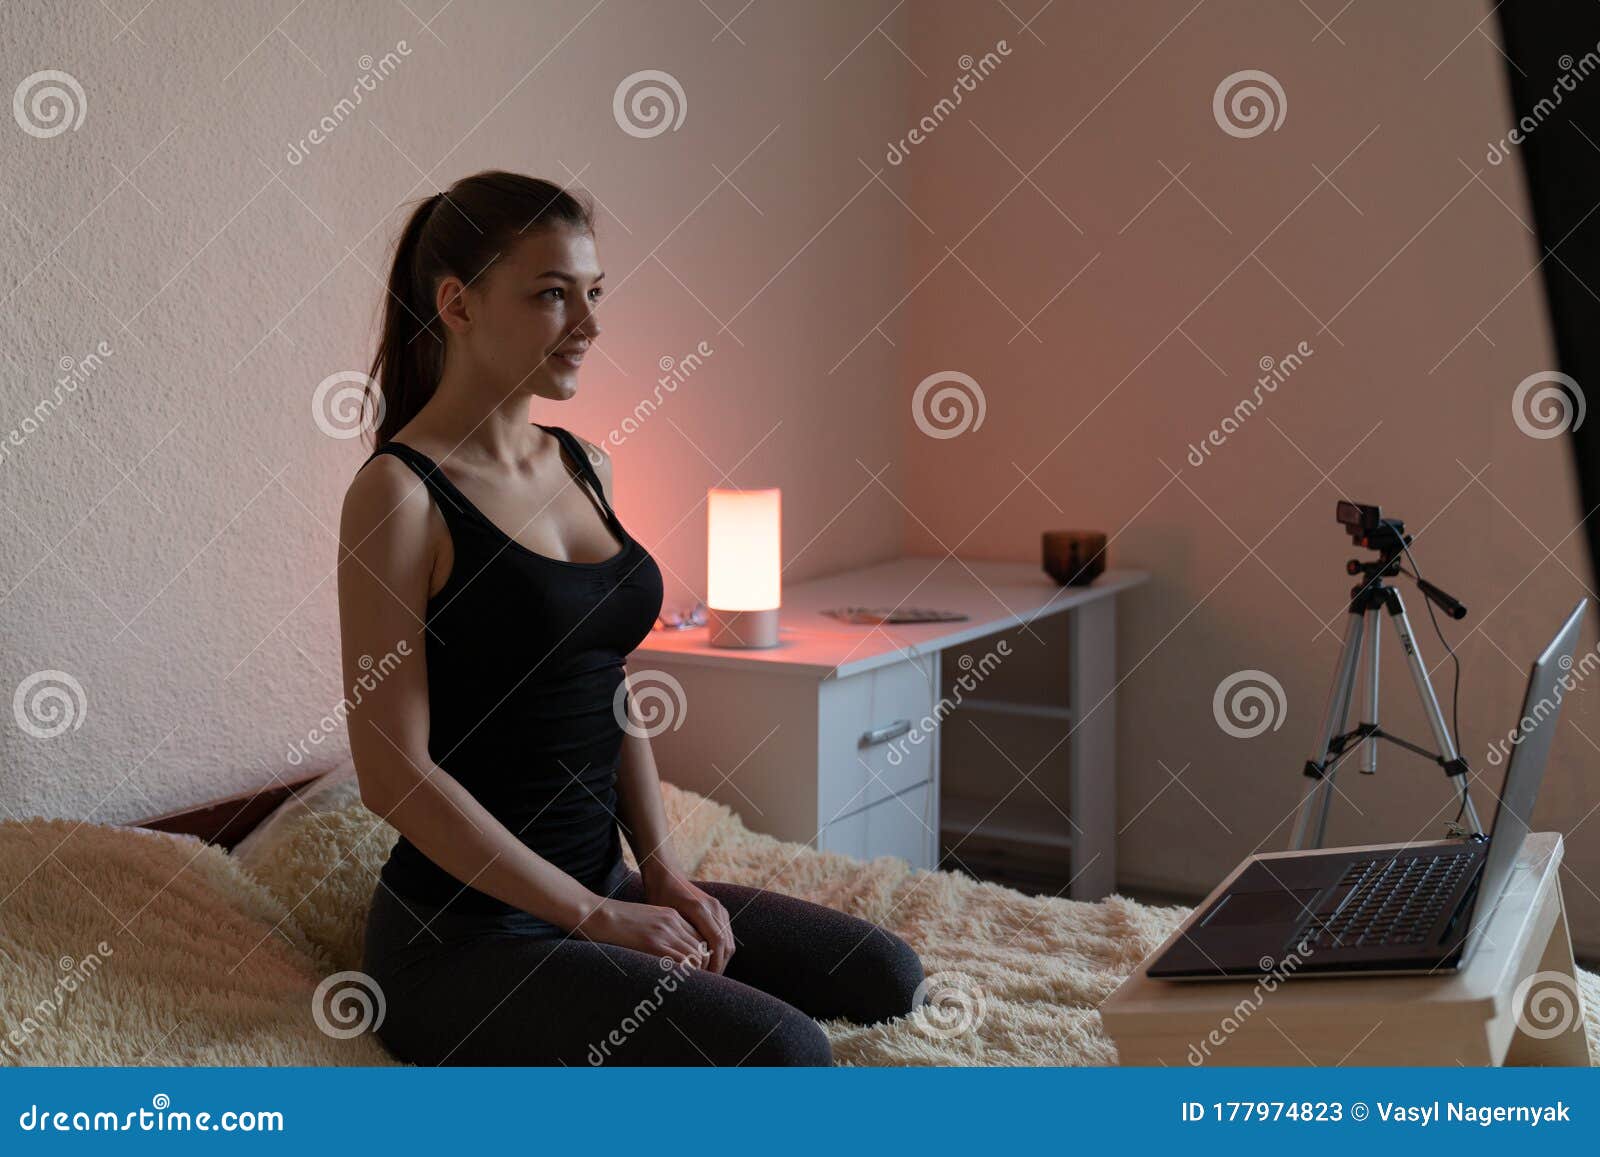 tre Stien efterskrift Smiling Teen Girl Speaking by Video Call Distance Job Interview Looking at  Camera Talking To Webcam, Female Vlogger Stock Image - Image of home,  business: 177974823